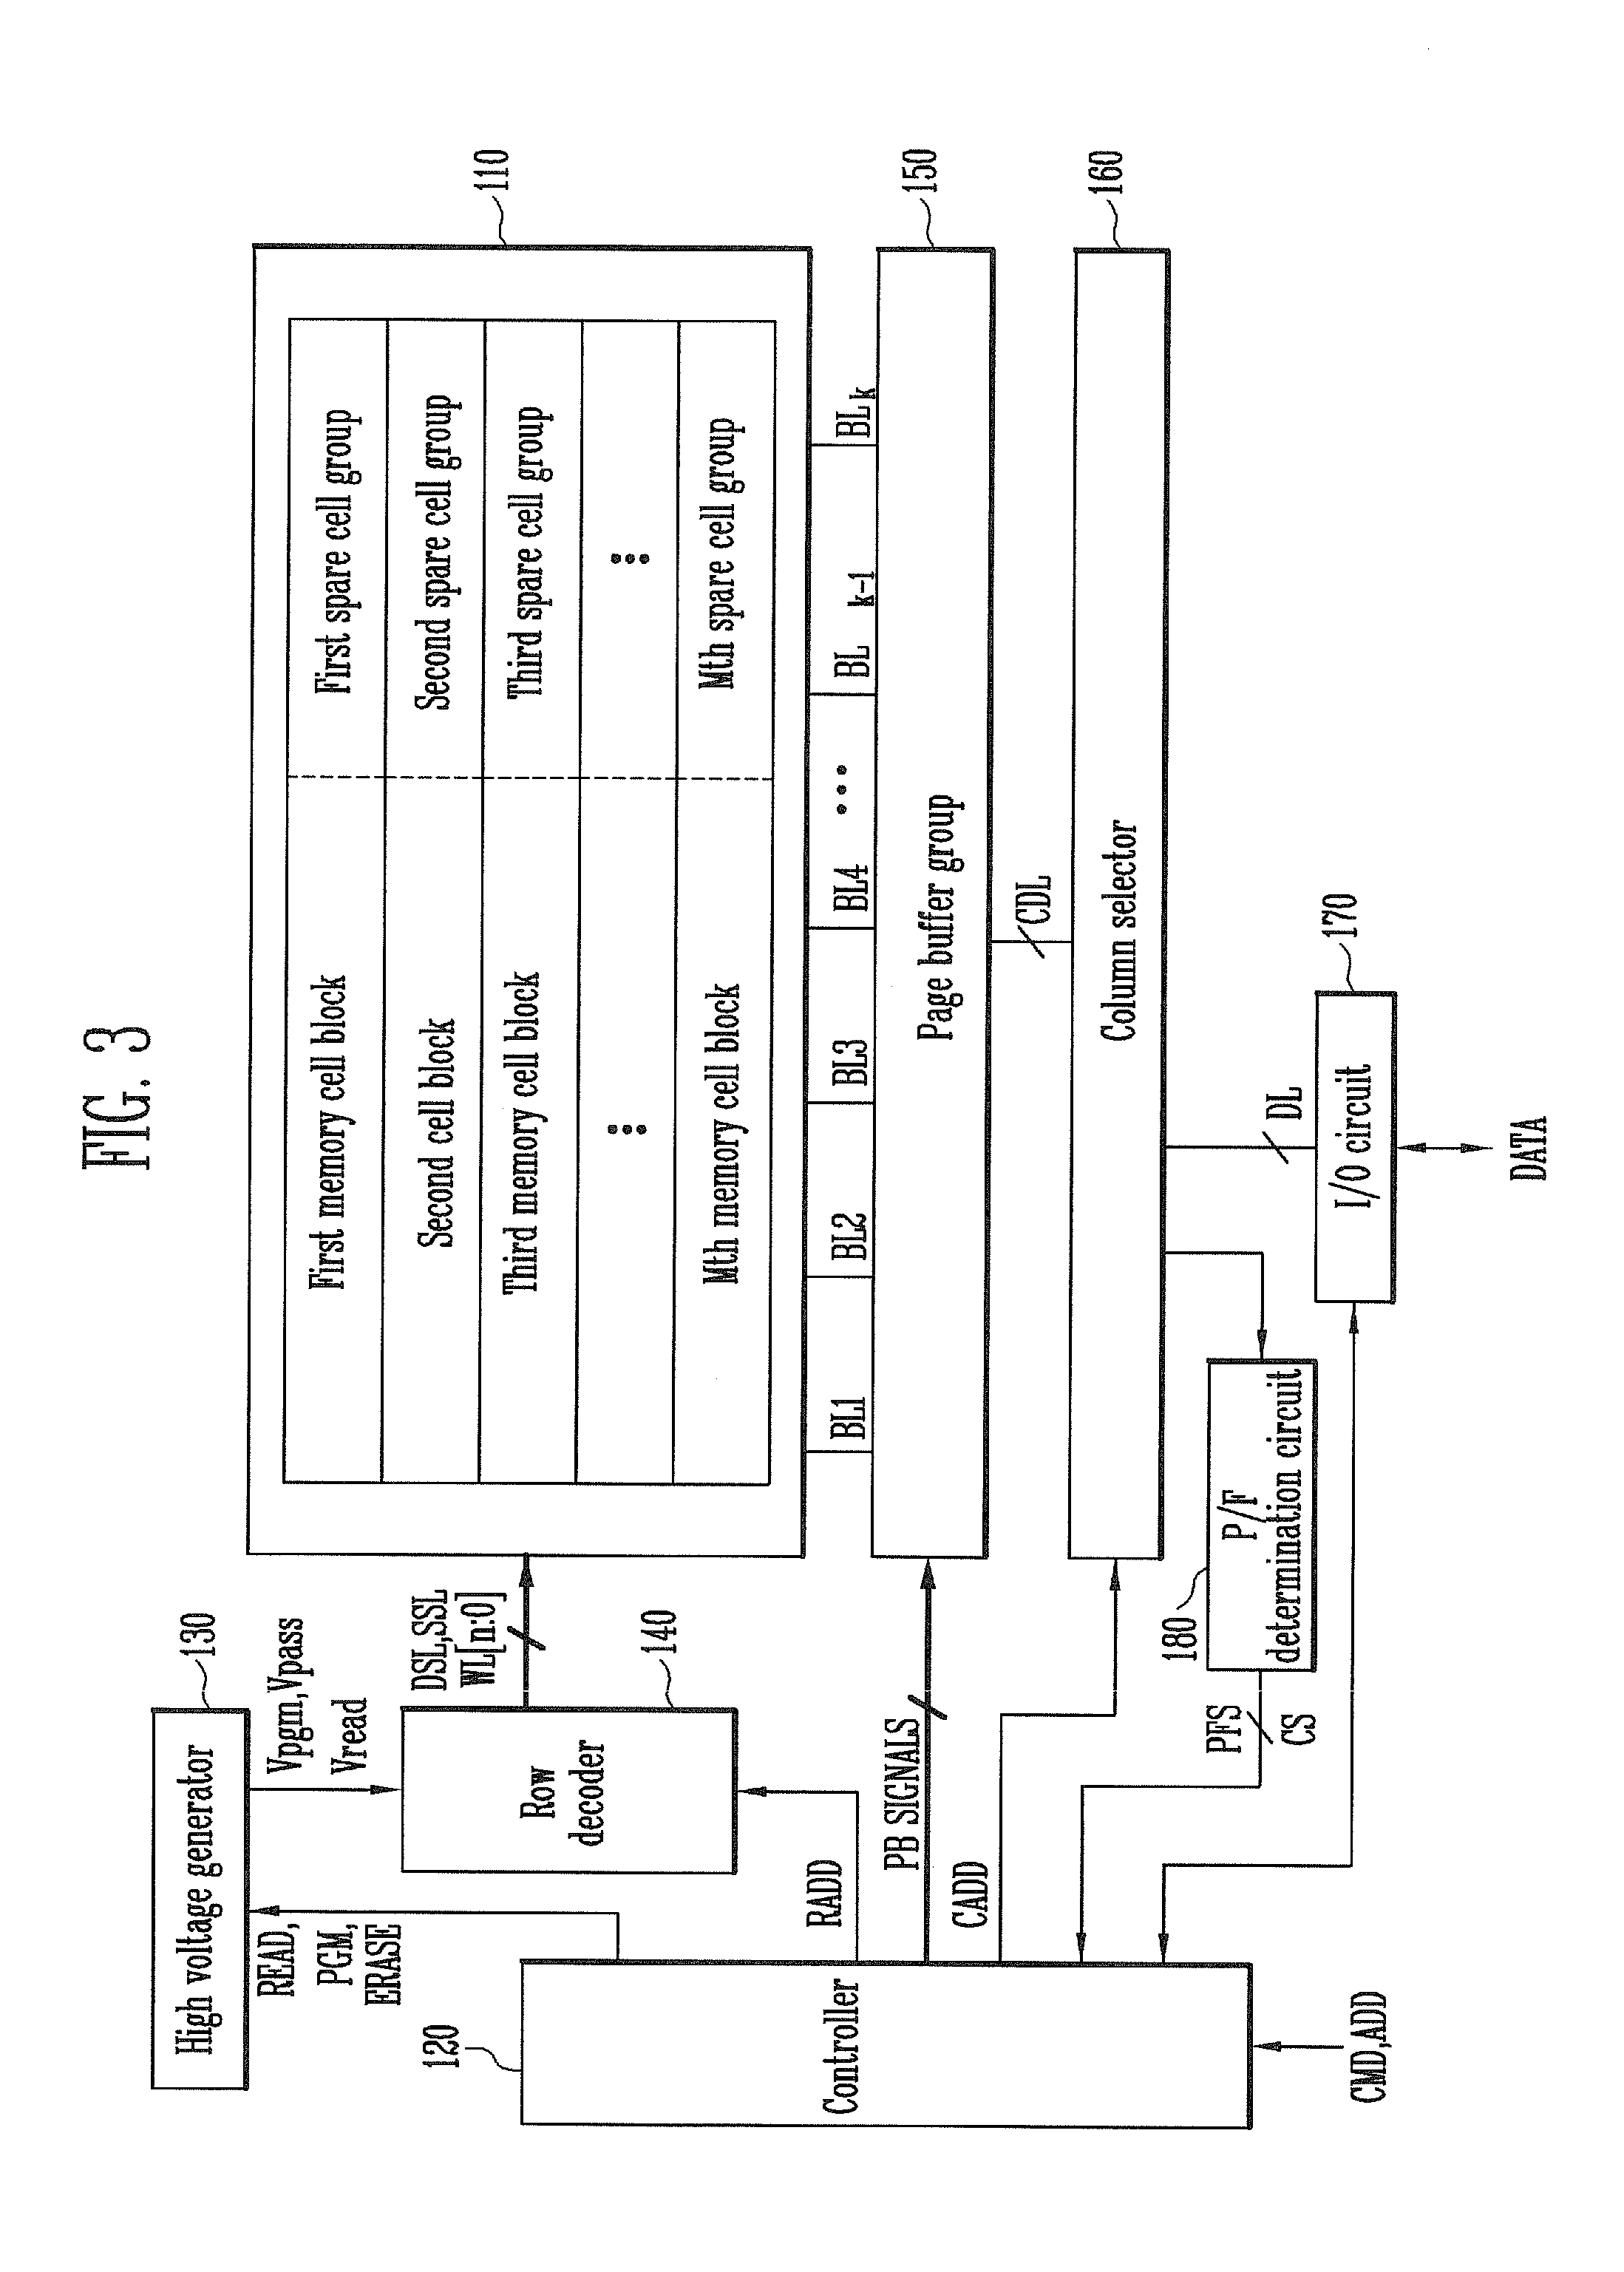 Memory system and method of operating the same